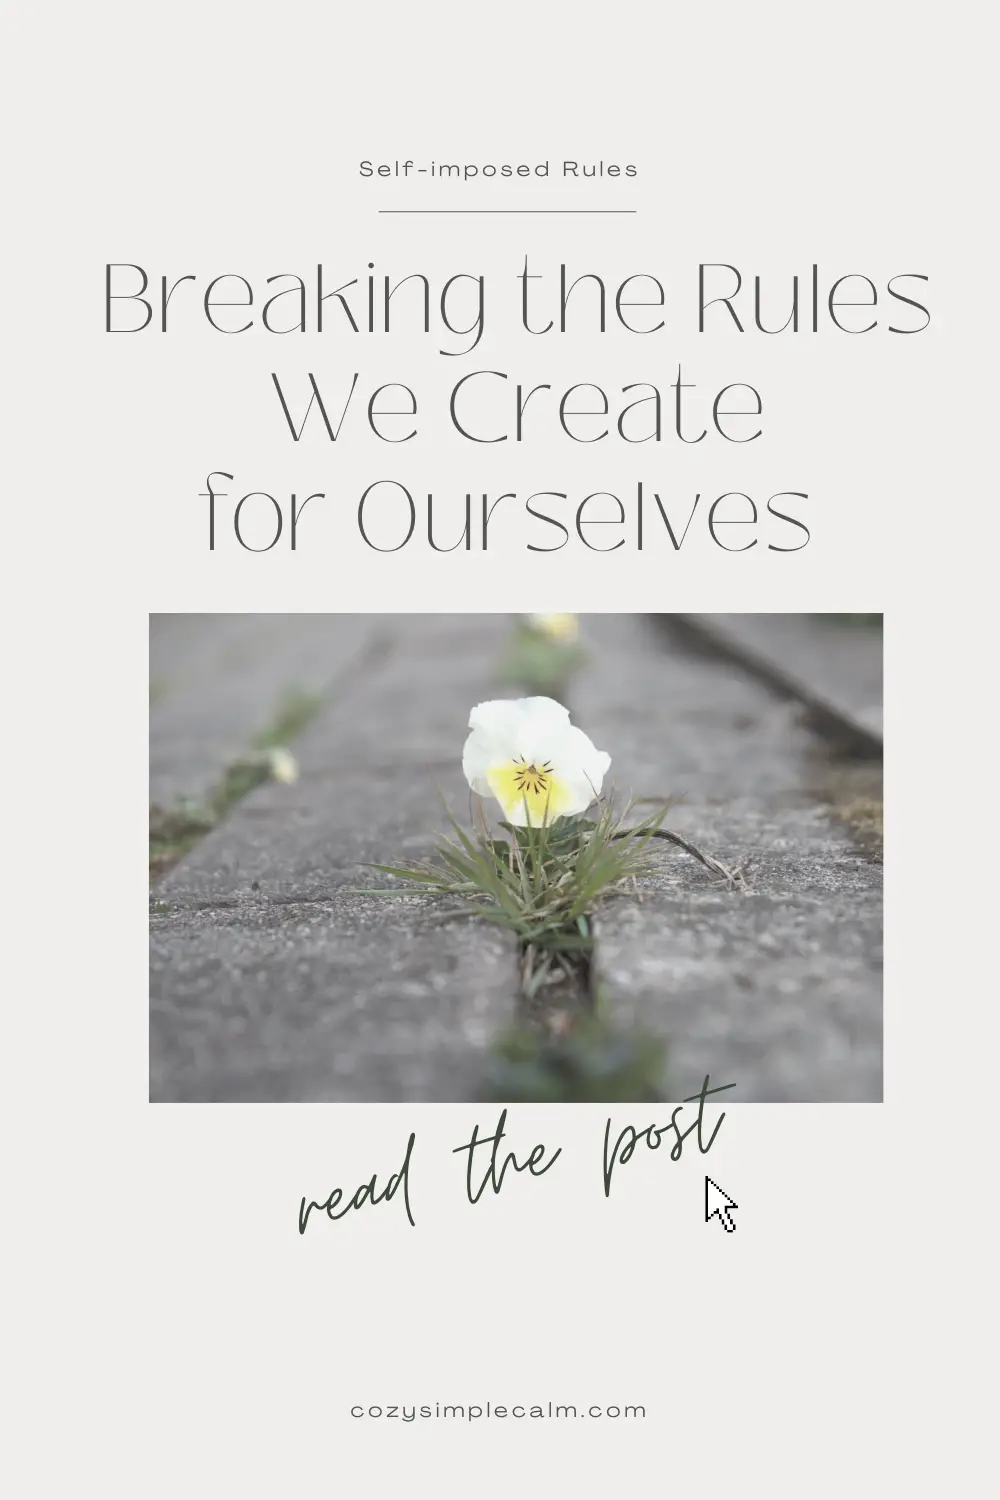 Image of small flower growing out of sidewalk - Text overlay: Breaking the rules we create for ourselves - cozysimplecalm.com